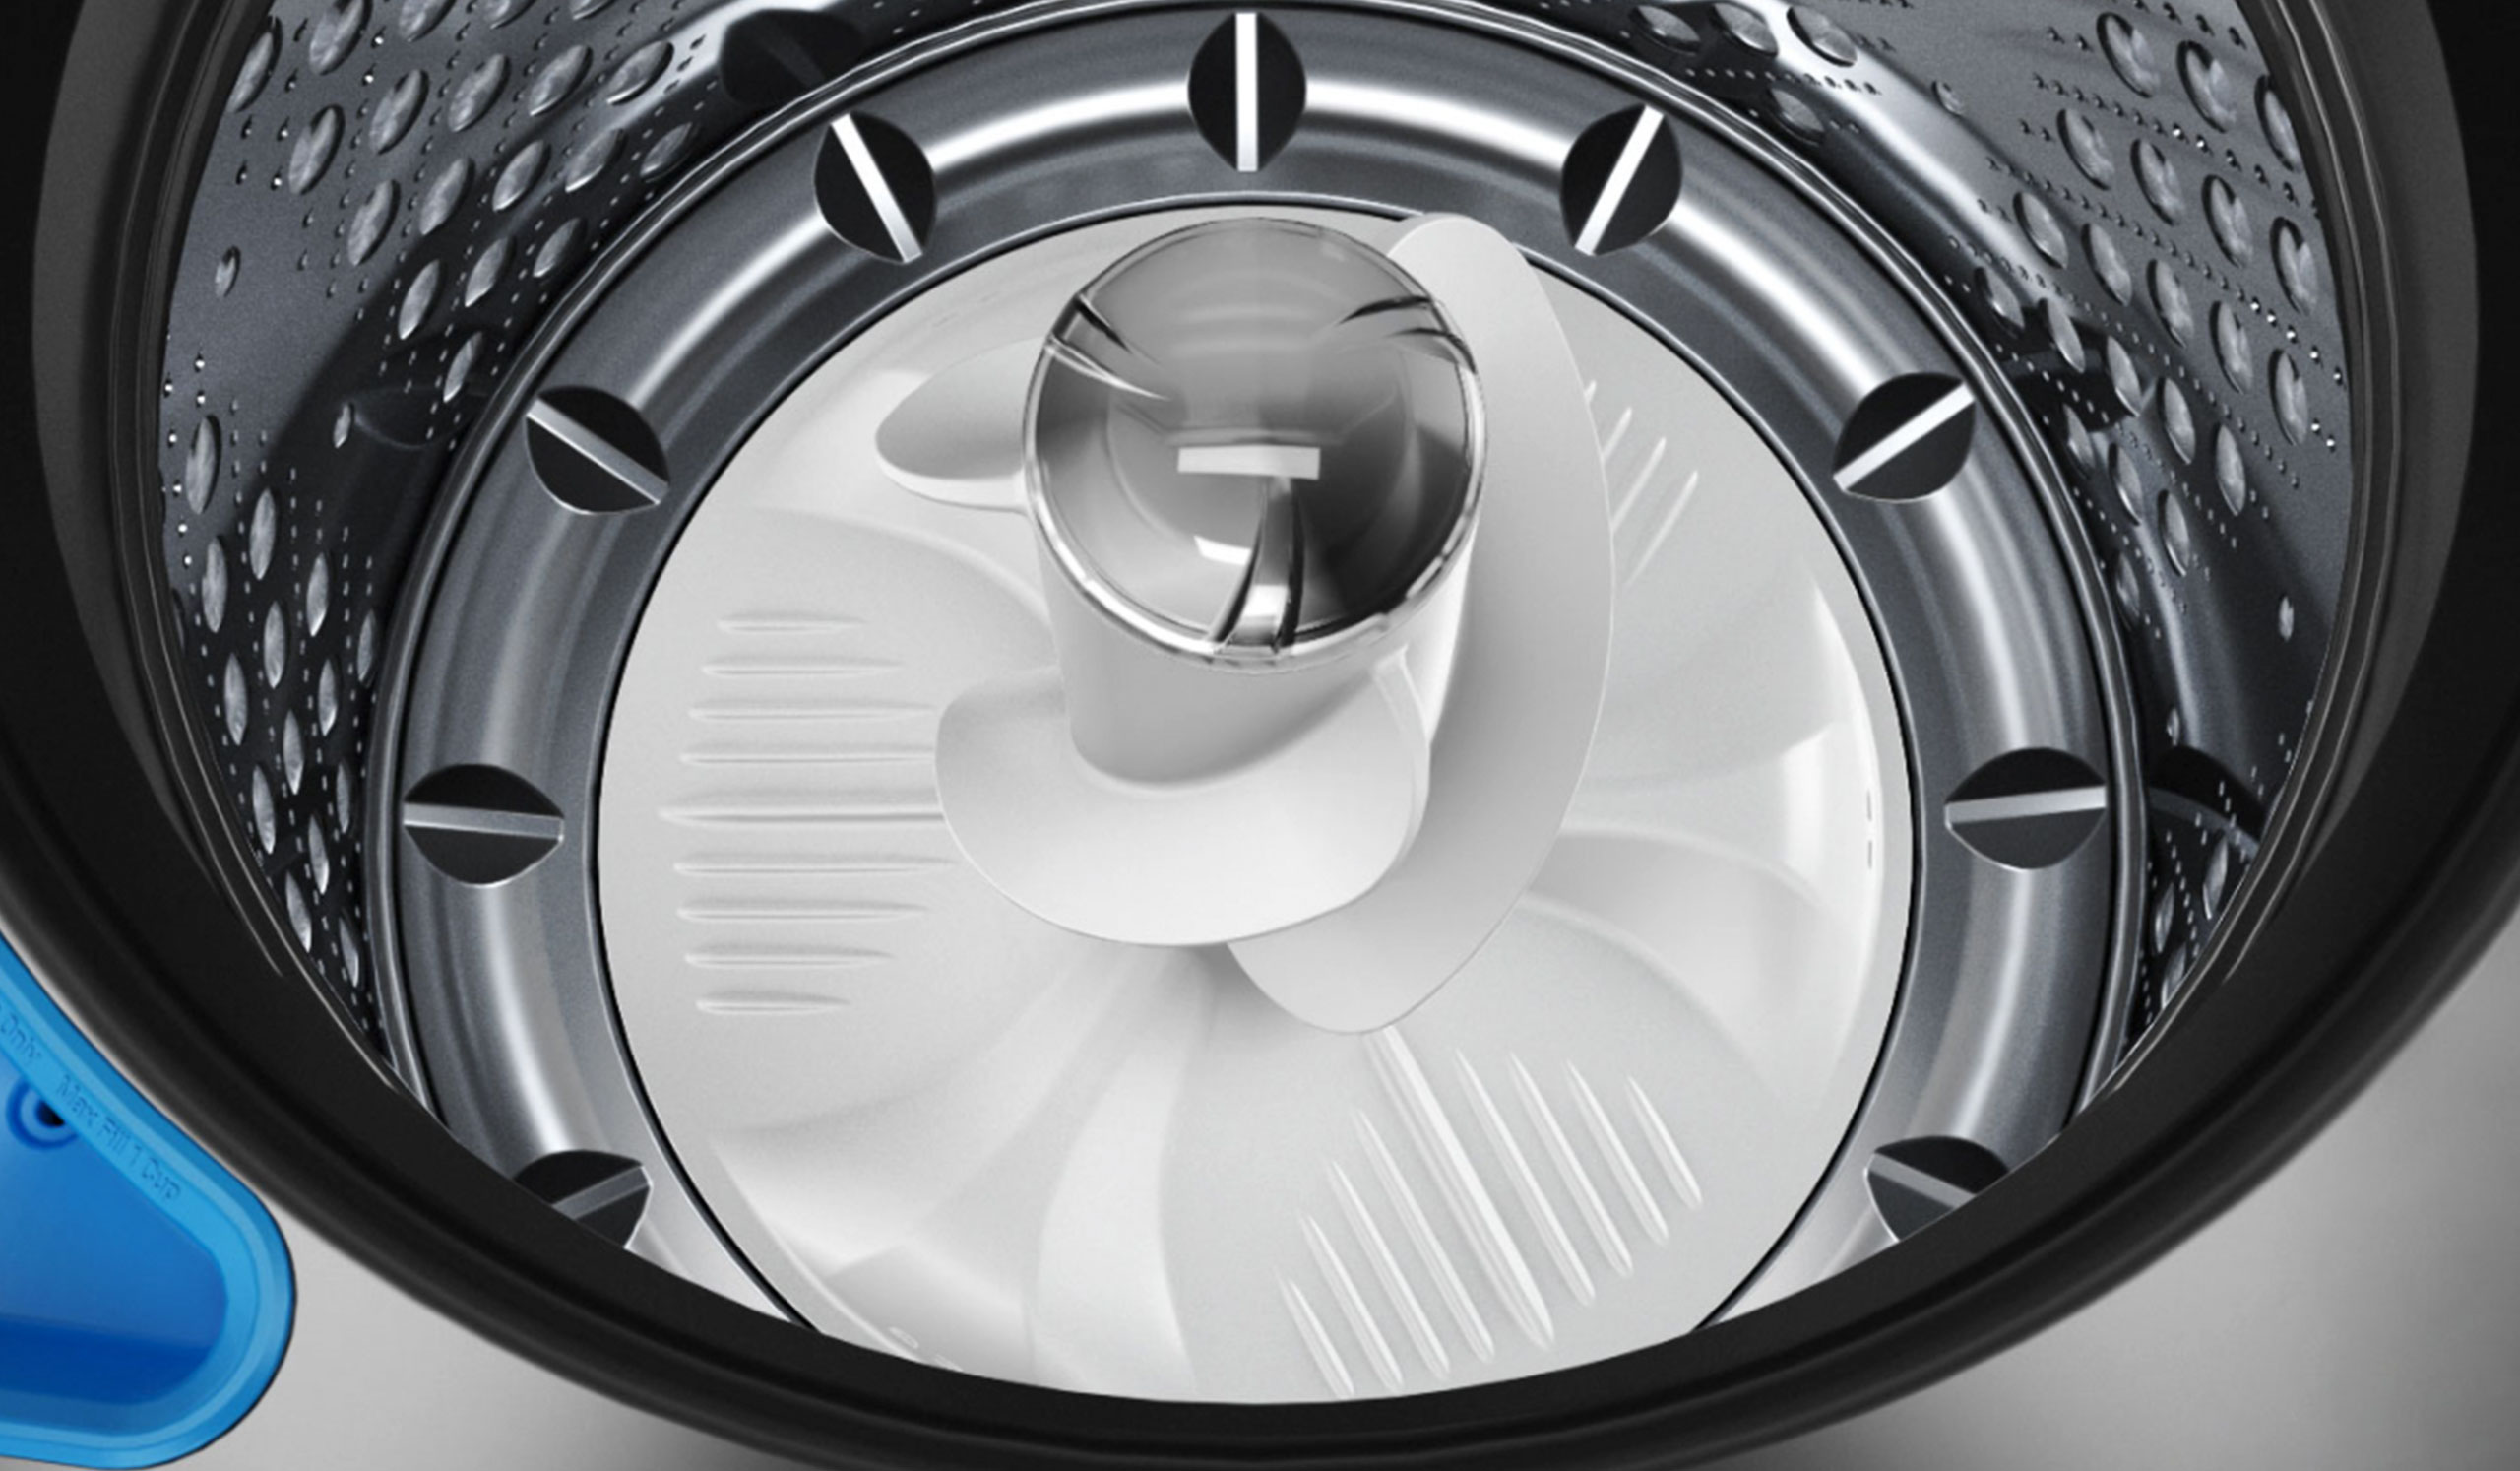 LG, Whirlpool Stirring Up the Washer Market YourSource News